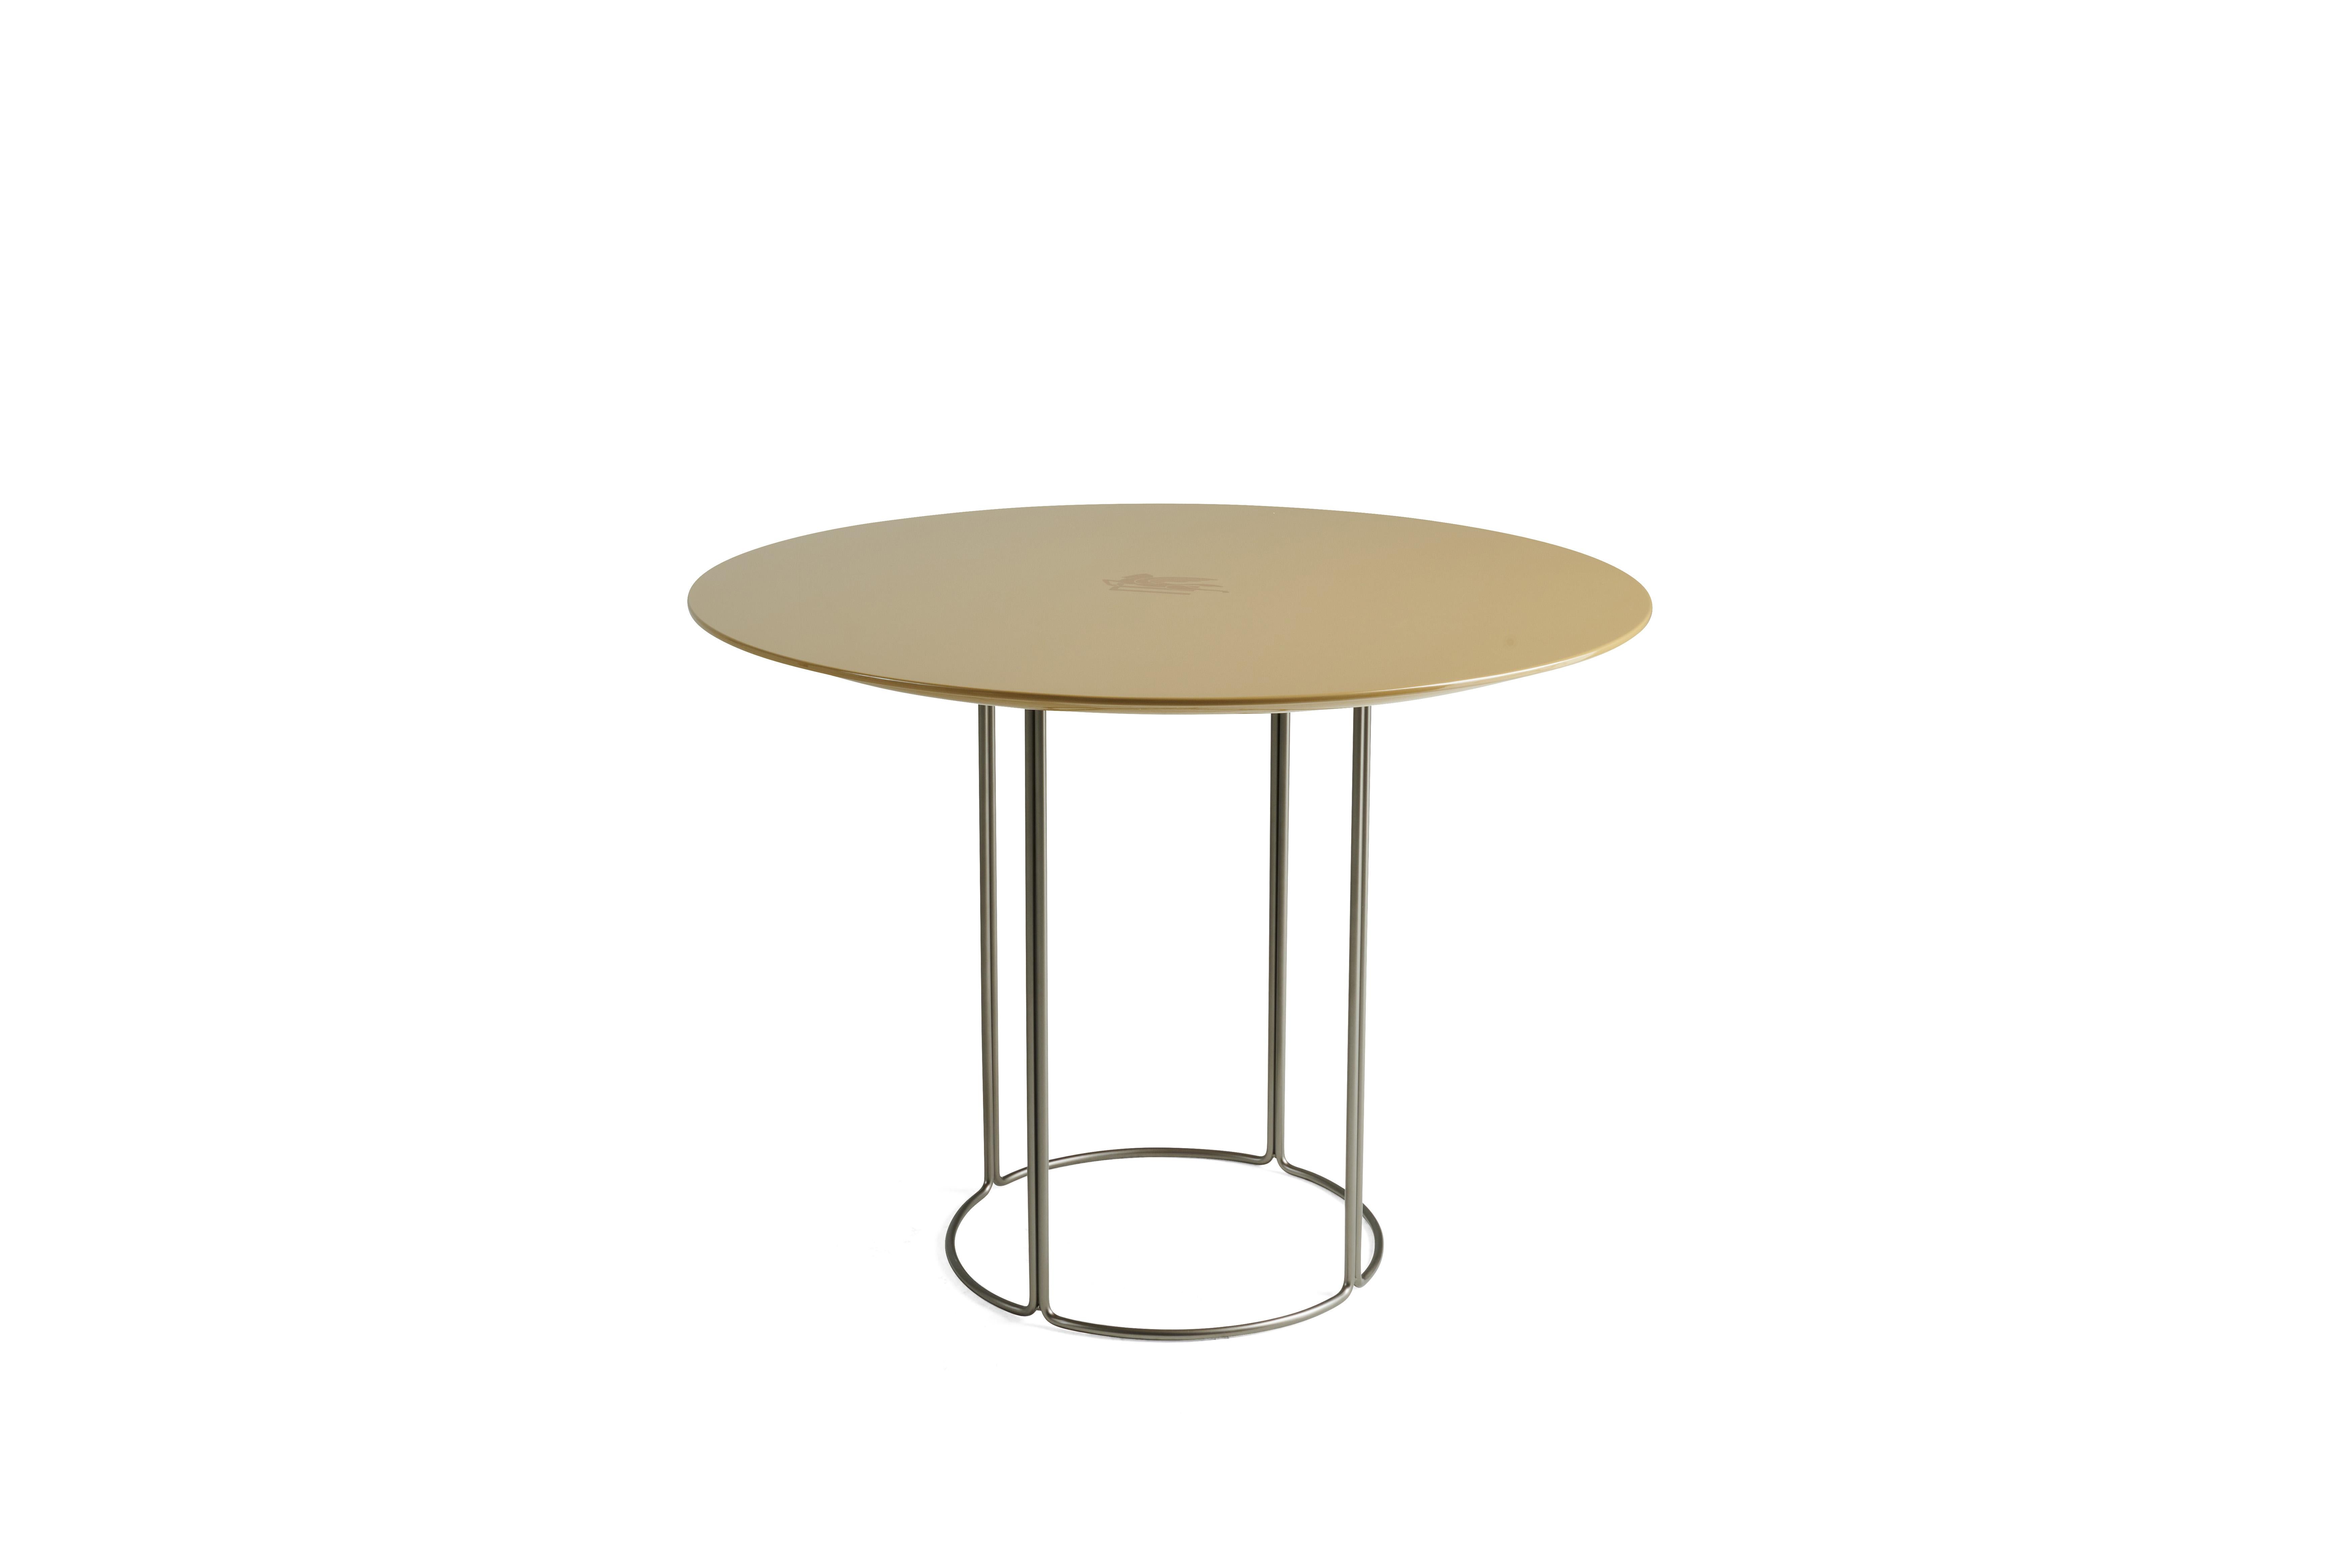 Lagoon is a dining table with a contemporary cut, characterized by a minimalist structure composed of curved metal tubes with a bronze finish and a top with a glossy lacquered finish available in different shades, enriched by the Etro logo placed in